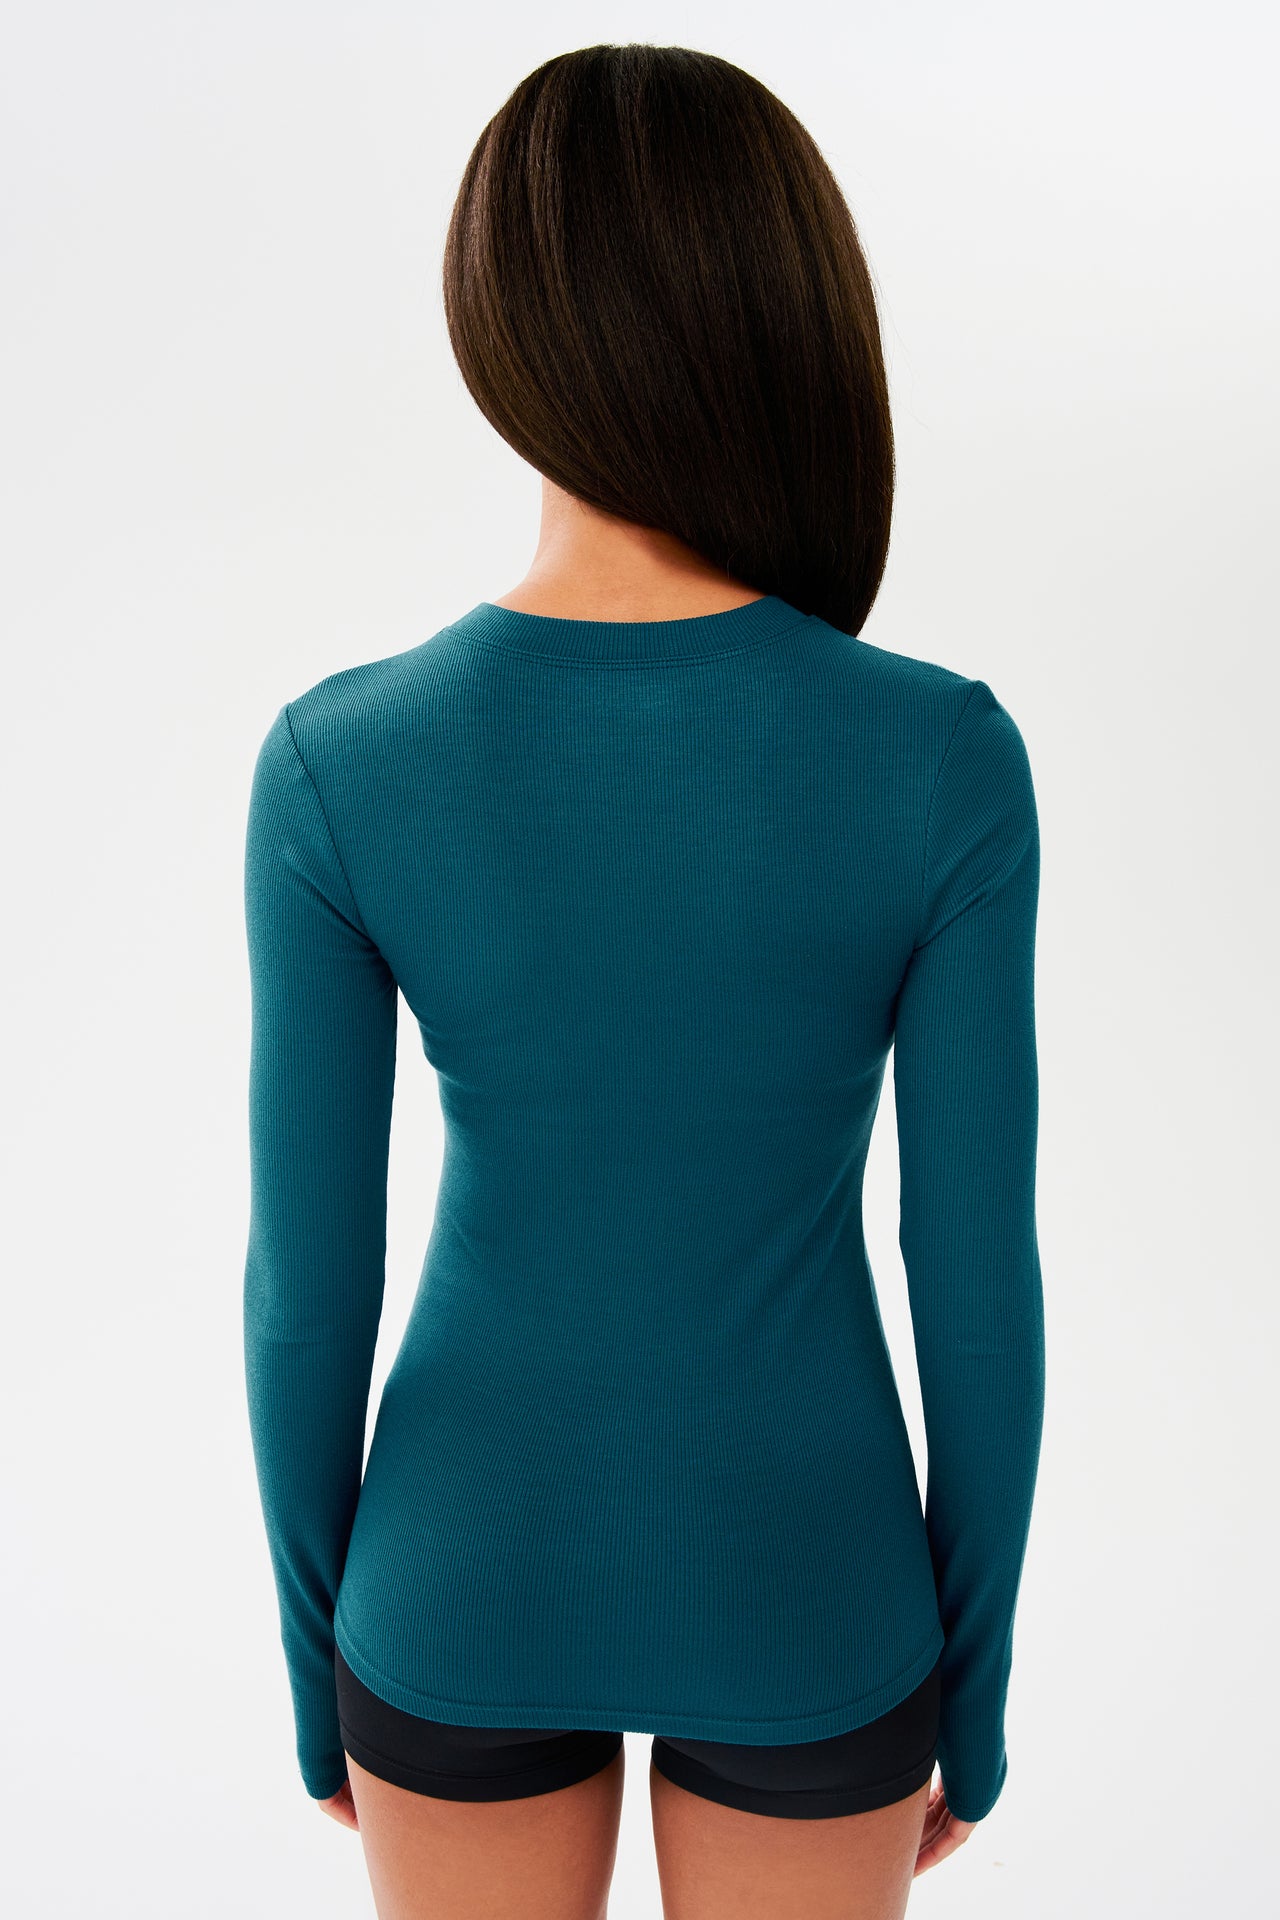 The back view of a woman wearing a SPLITS59 Louise Rib Long Sleeve - Peacock made of modal and spandex.